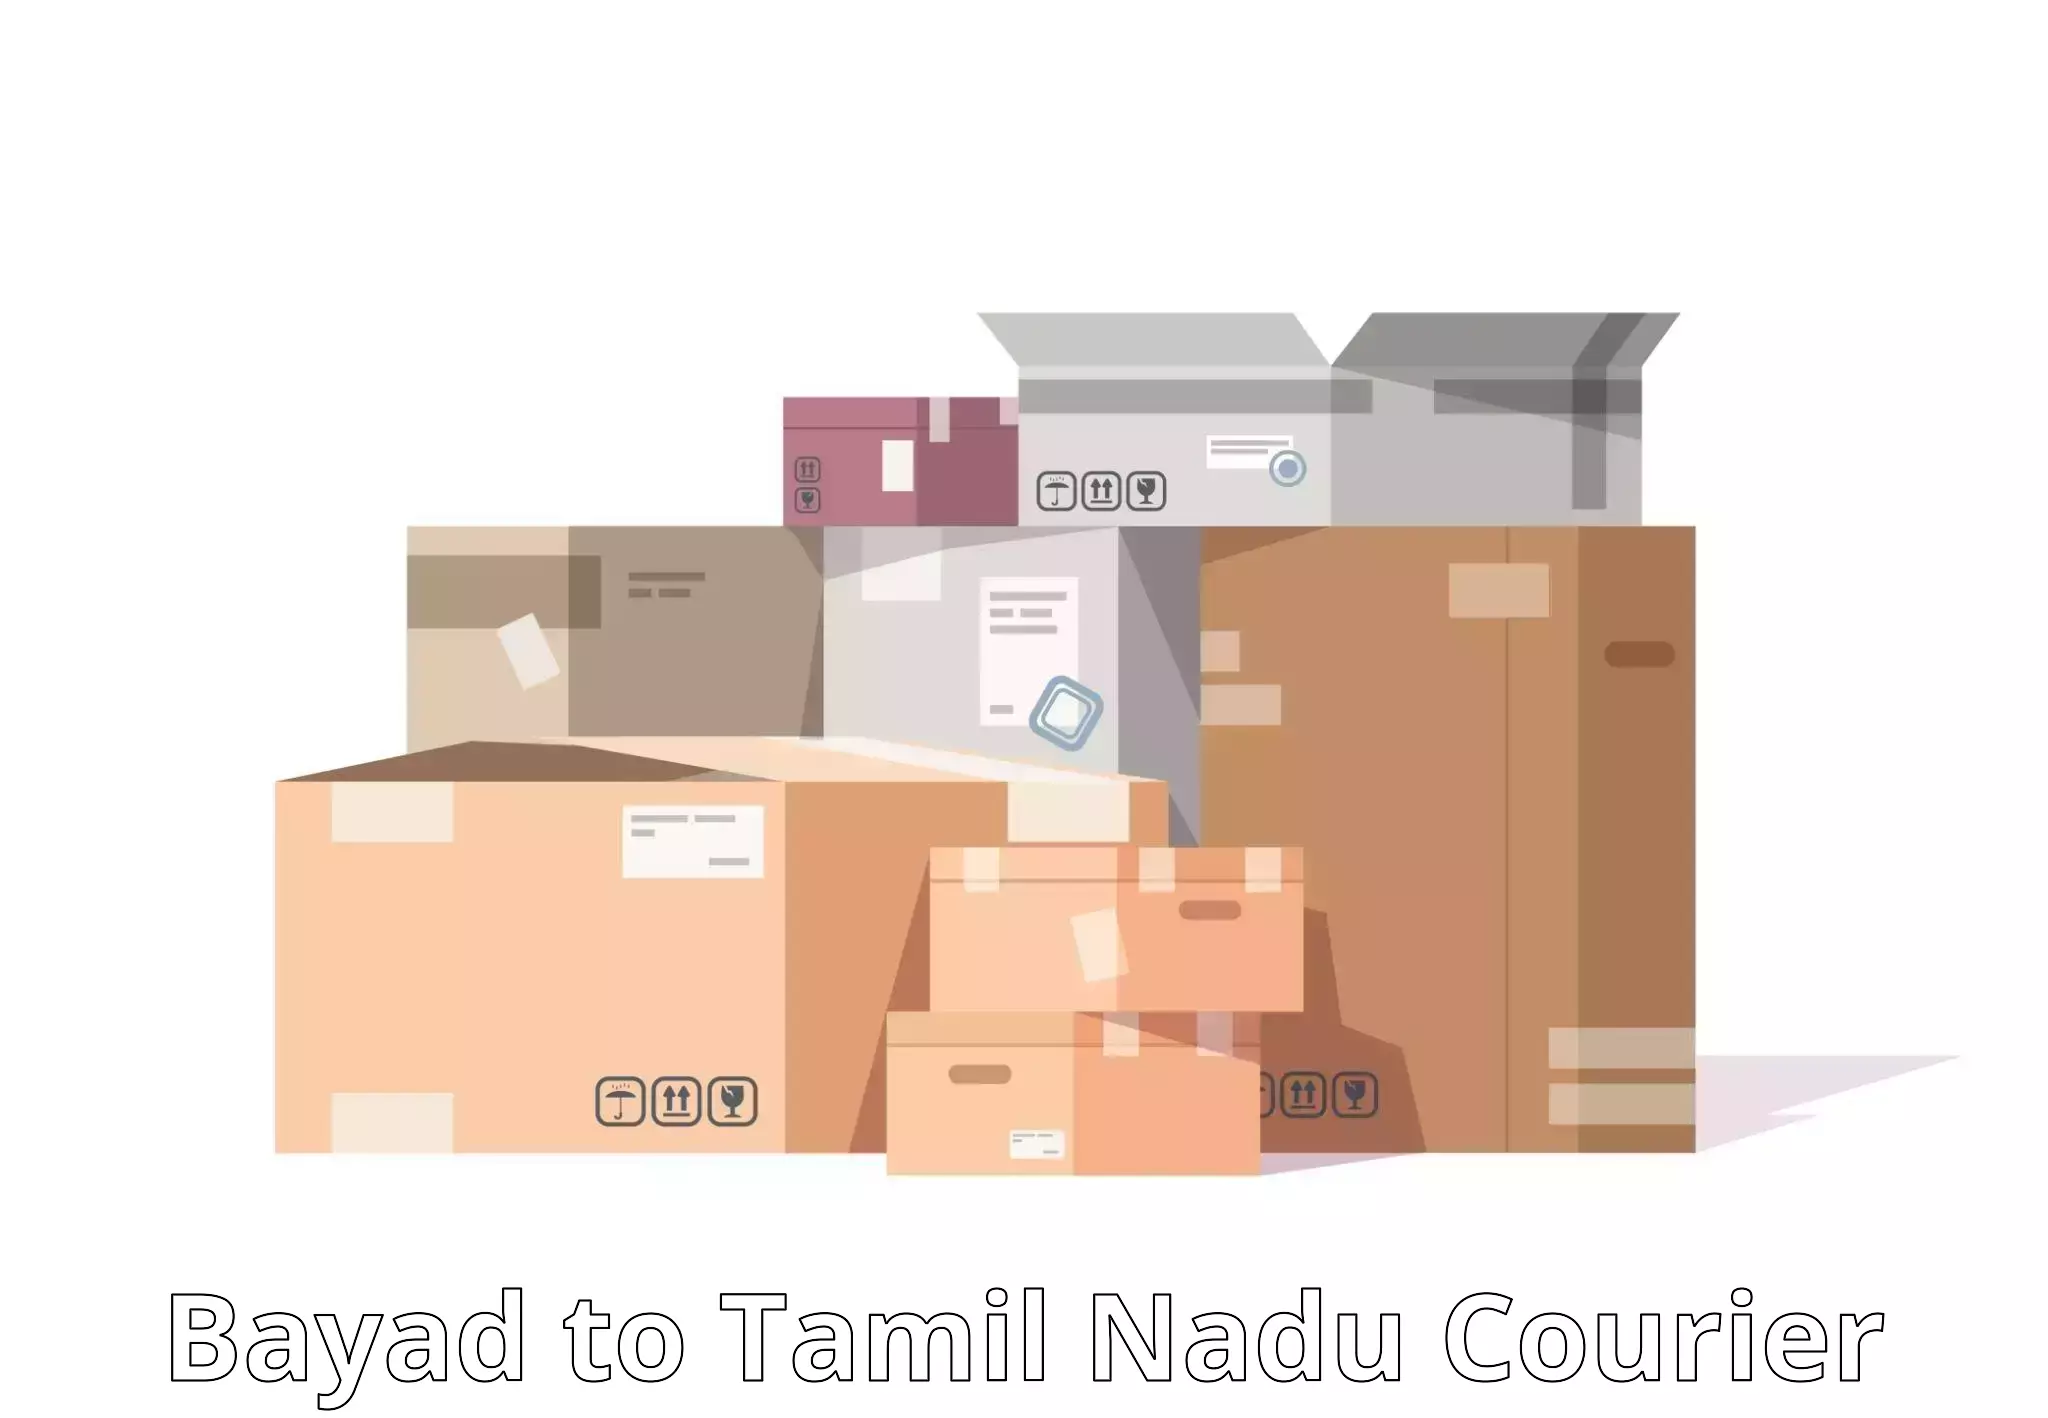 Nationwide parcel services Bayad to Chennai Port